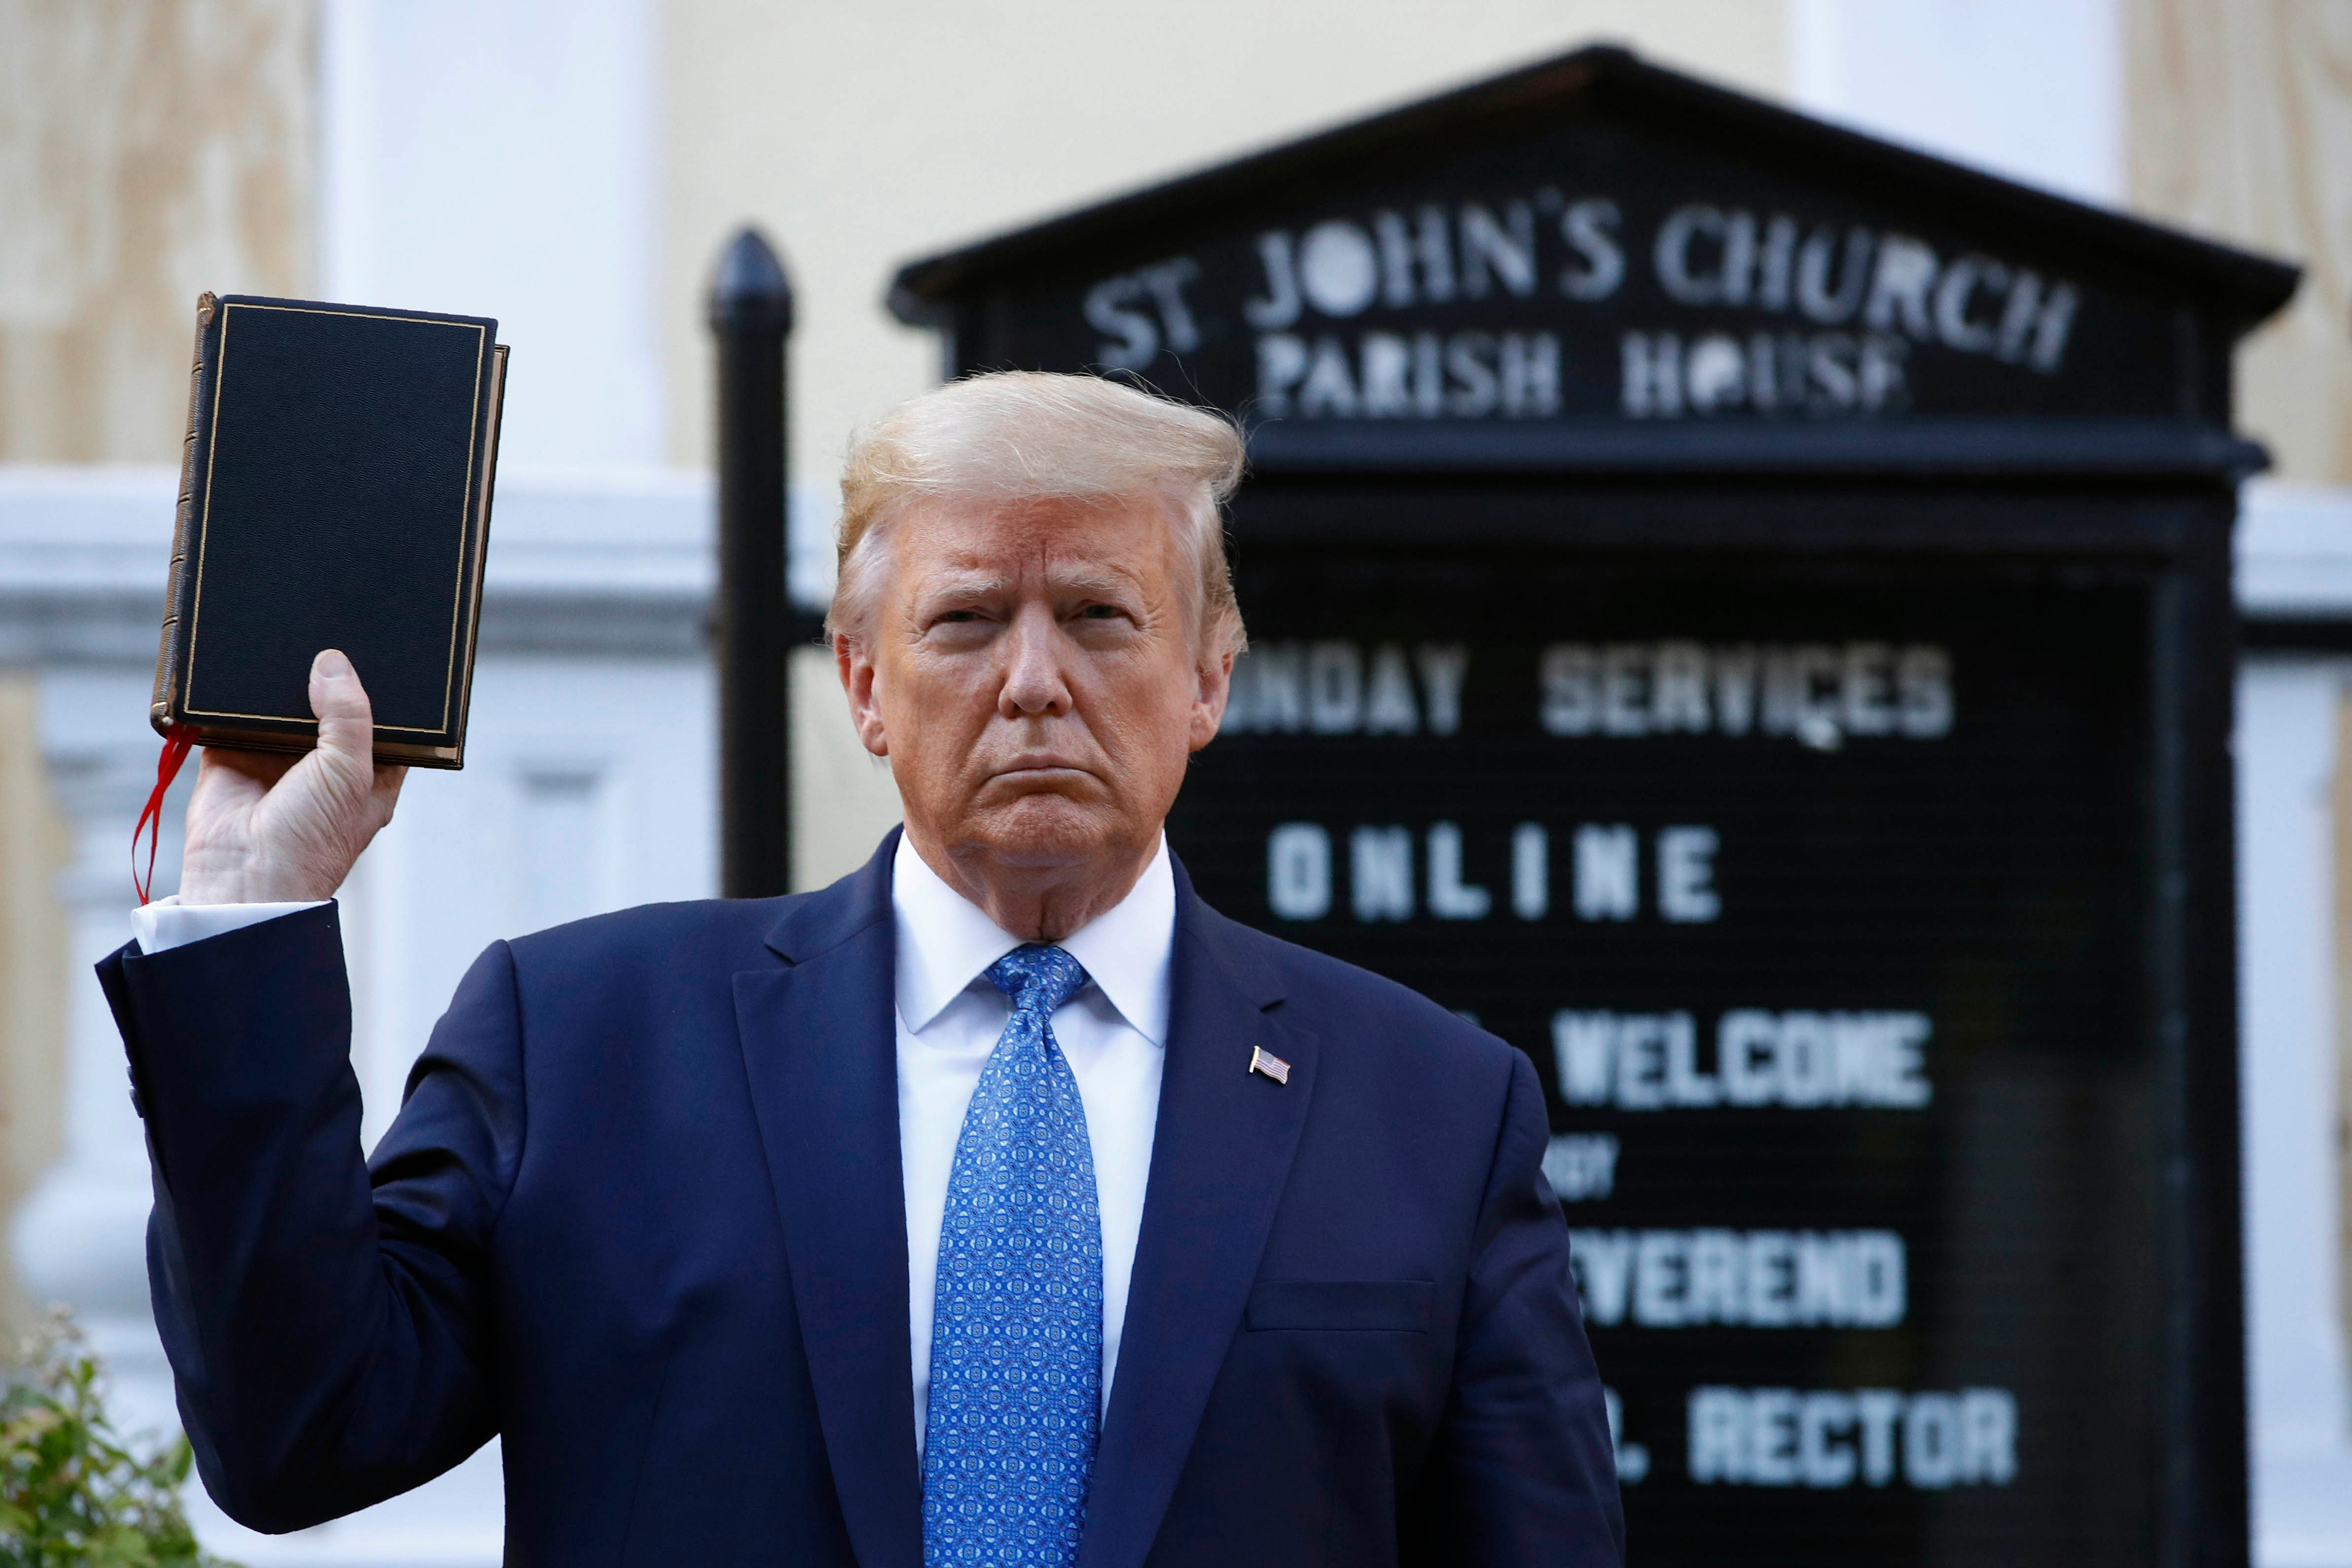 Other Episcopalian leaders denounced Trump's visit to the church as "disgraceful and morally repugnant." (Credit: AP Photo)